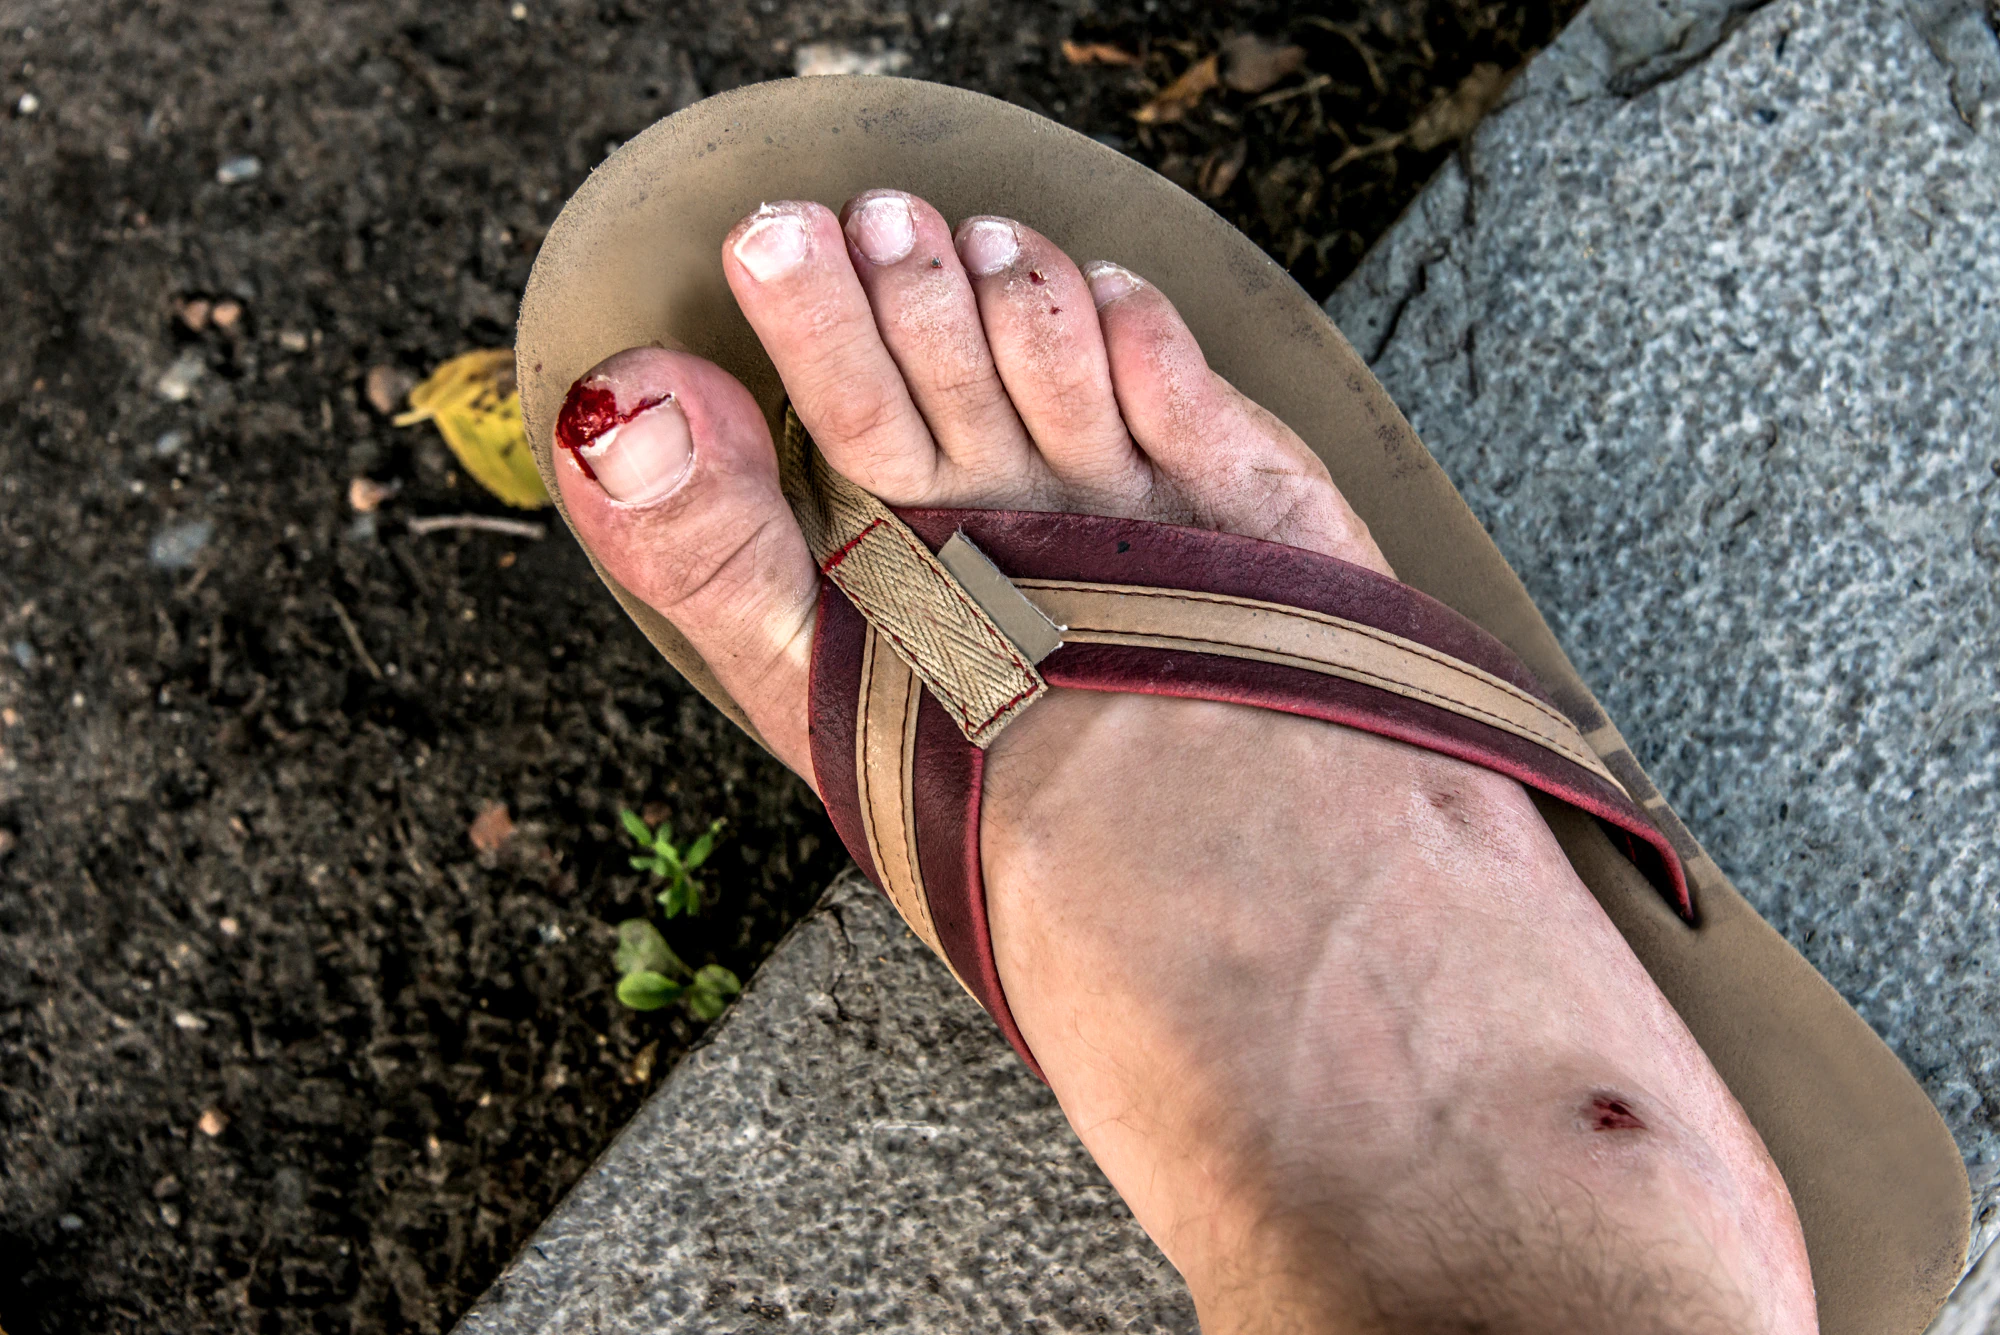 Why Flip Flops Could Be Bad for Your Feet - Men's Health